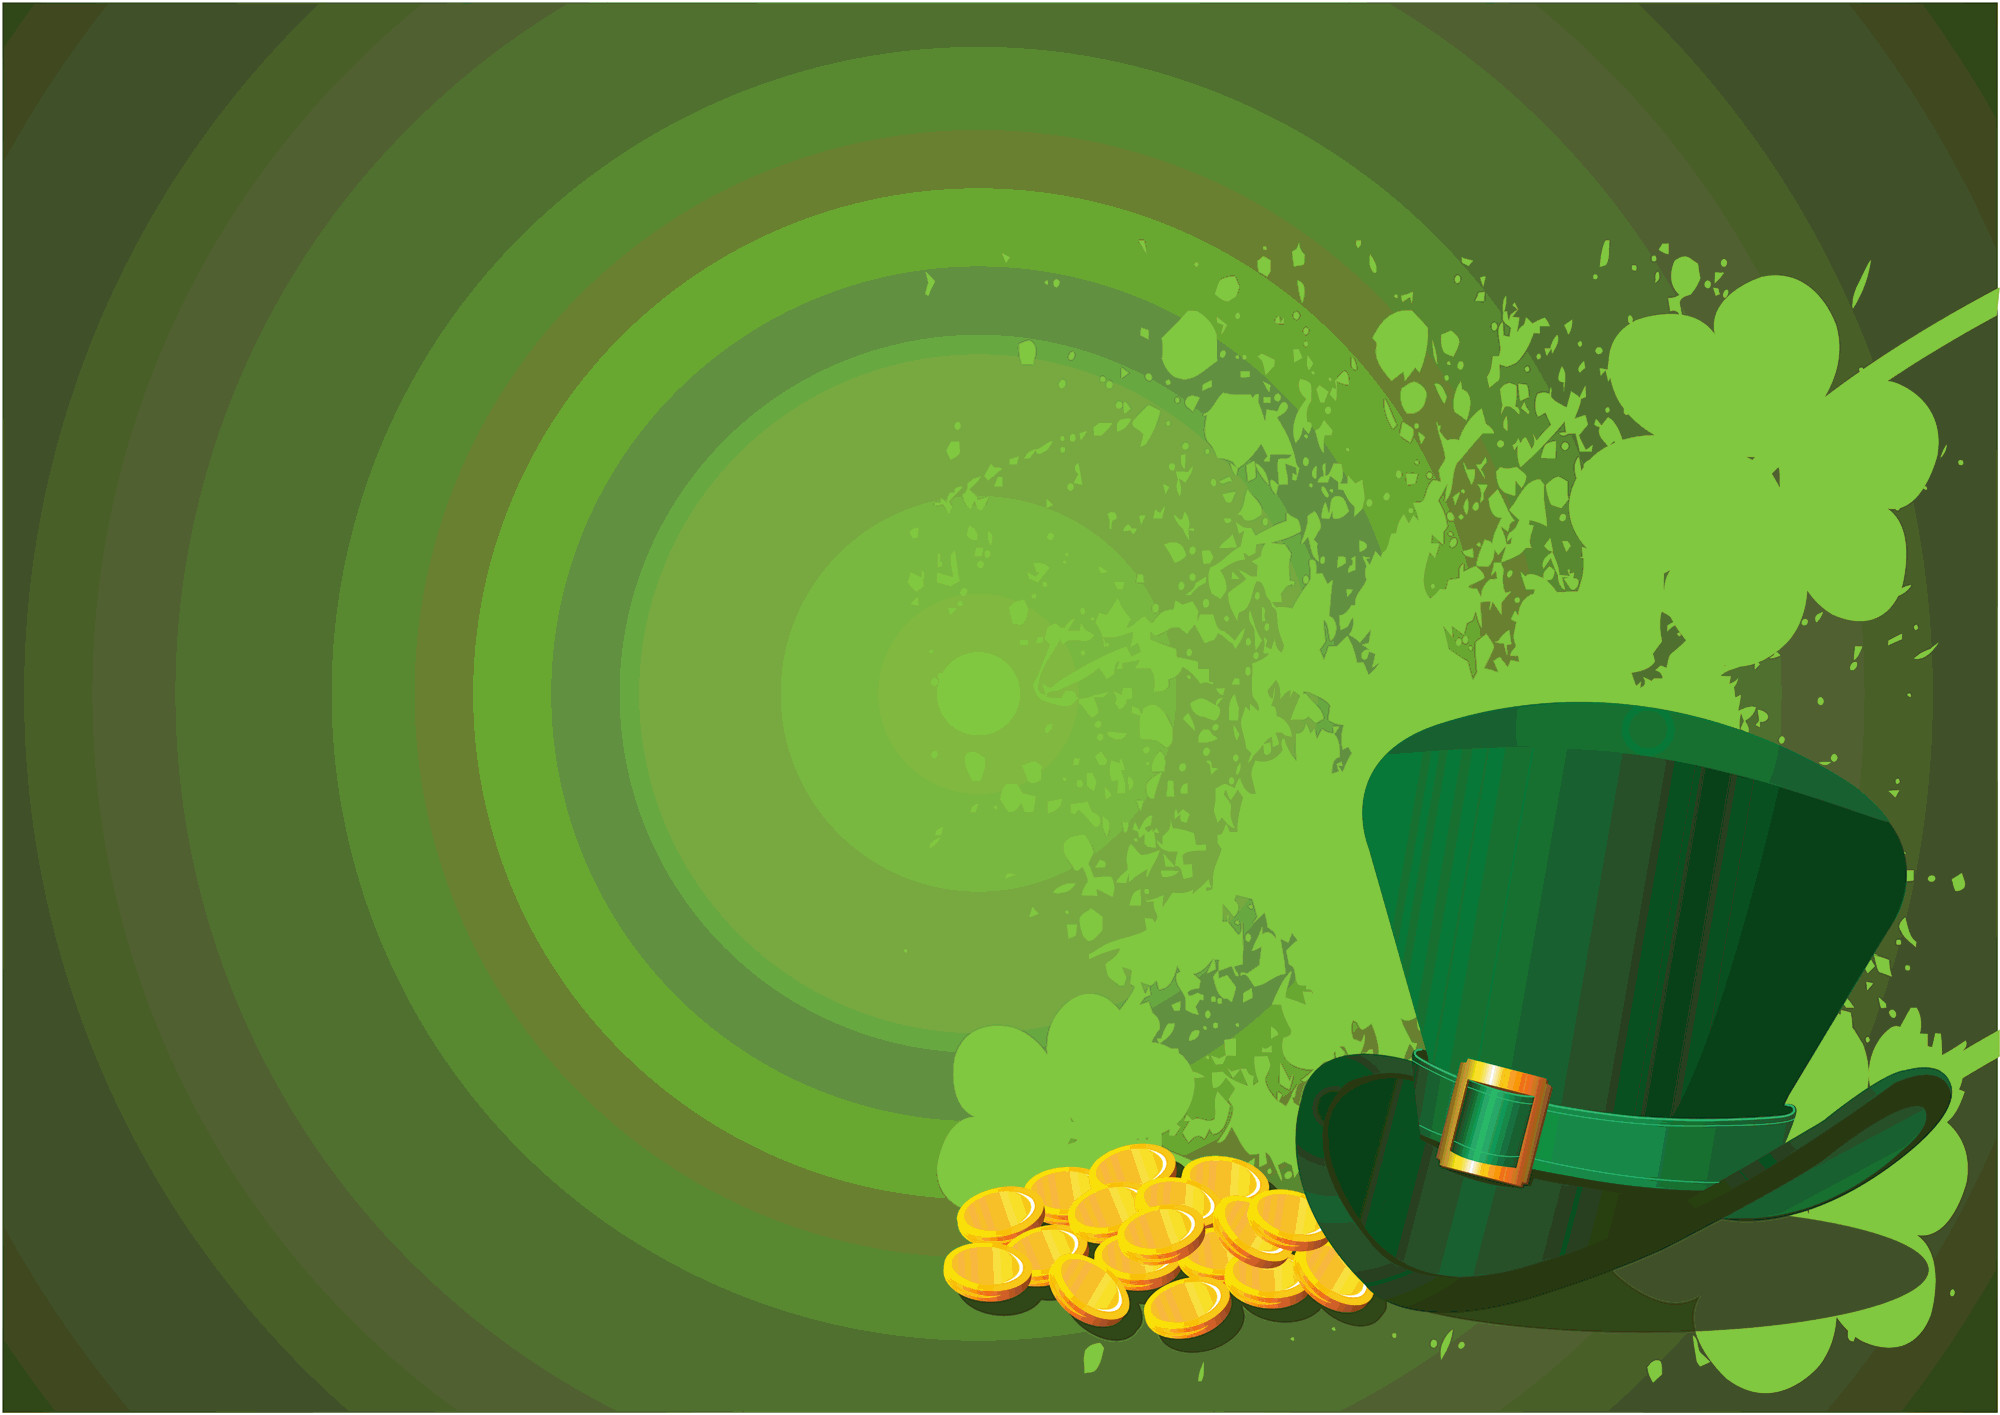 Celebrate St Patricks Day with 200 Free Happy St Patricks Day Images  and Backgrounds  Pixabay